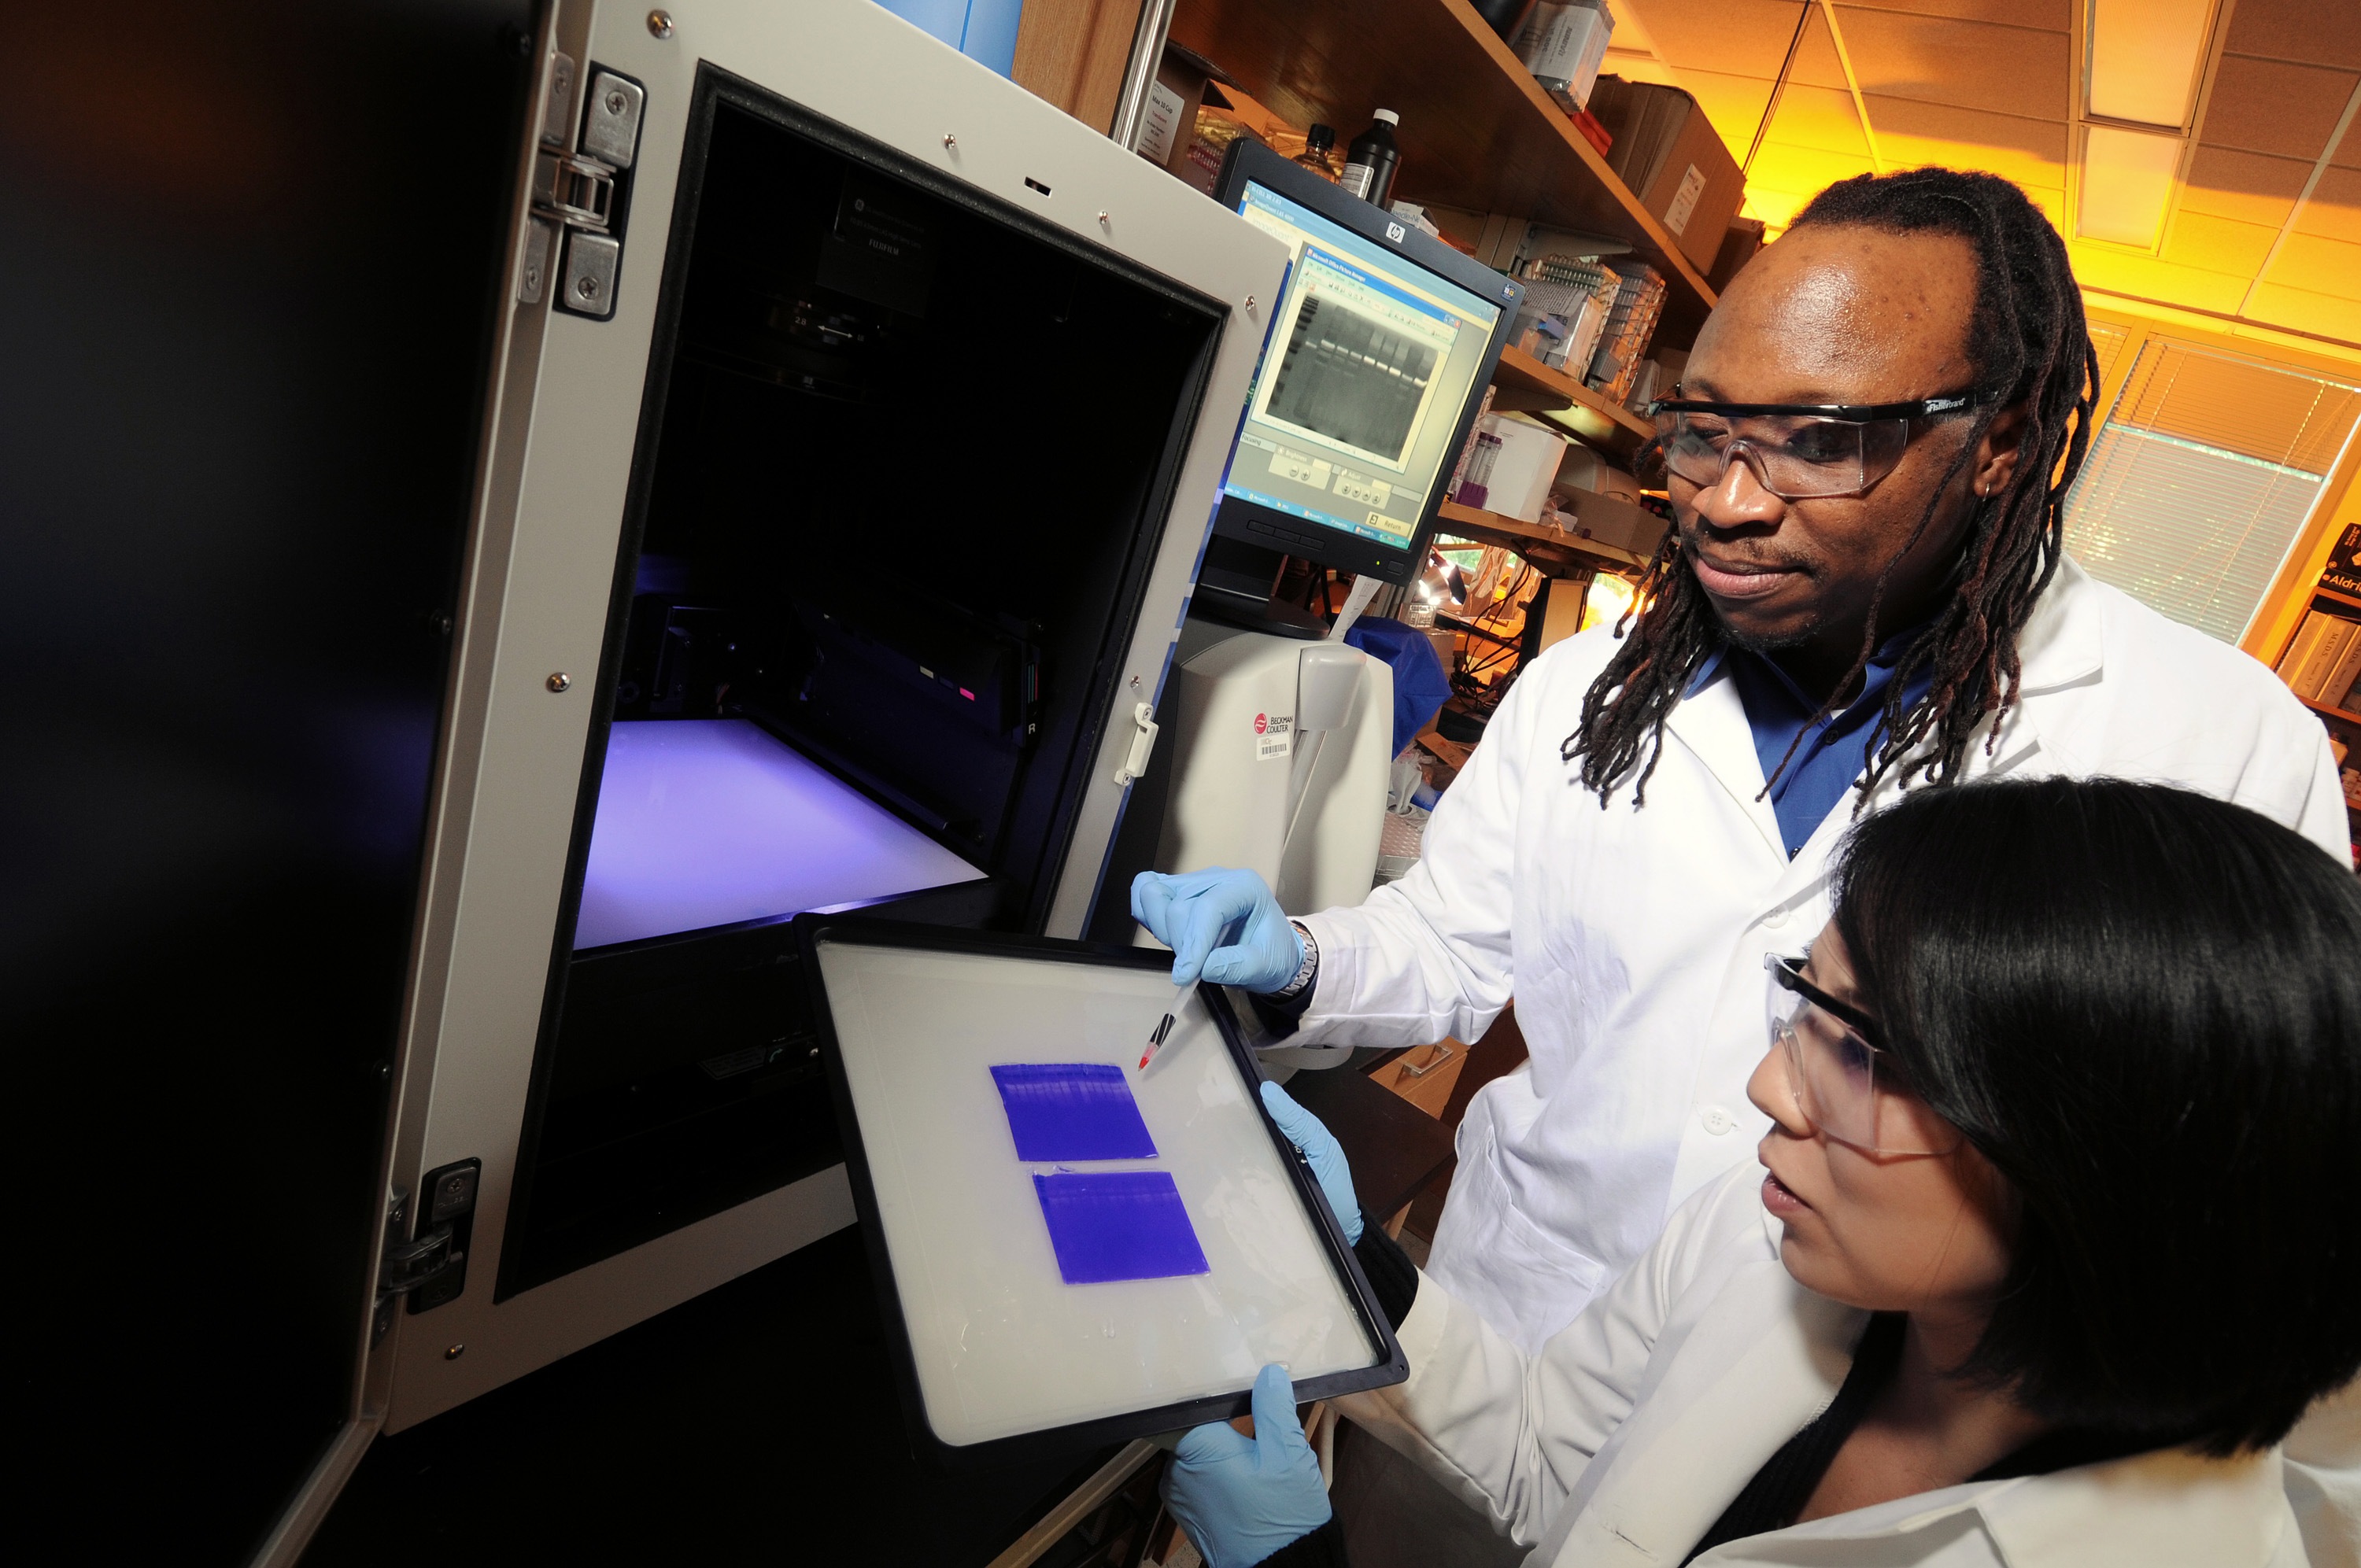 Georgia Tech/Emory University biomedical engineering associate professor Manu Platt (standing) and graduate student Keon-Young Park examine gels that display the activity levels of cathepsins, which are protein-degrading enzymes. In a new study, the researchers are studying levels of cathepsins and other signaling chemicals in an effort to predict the invasiveness of breast cancer in individual patients. (Credit: Gary Meek, Georgia Tech)